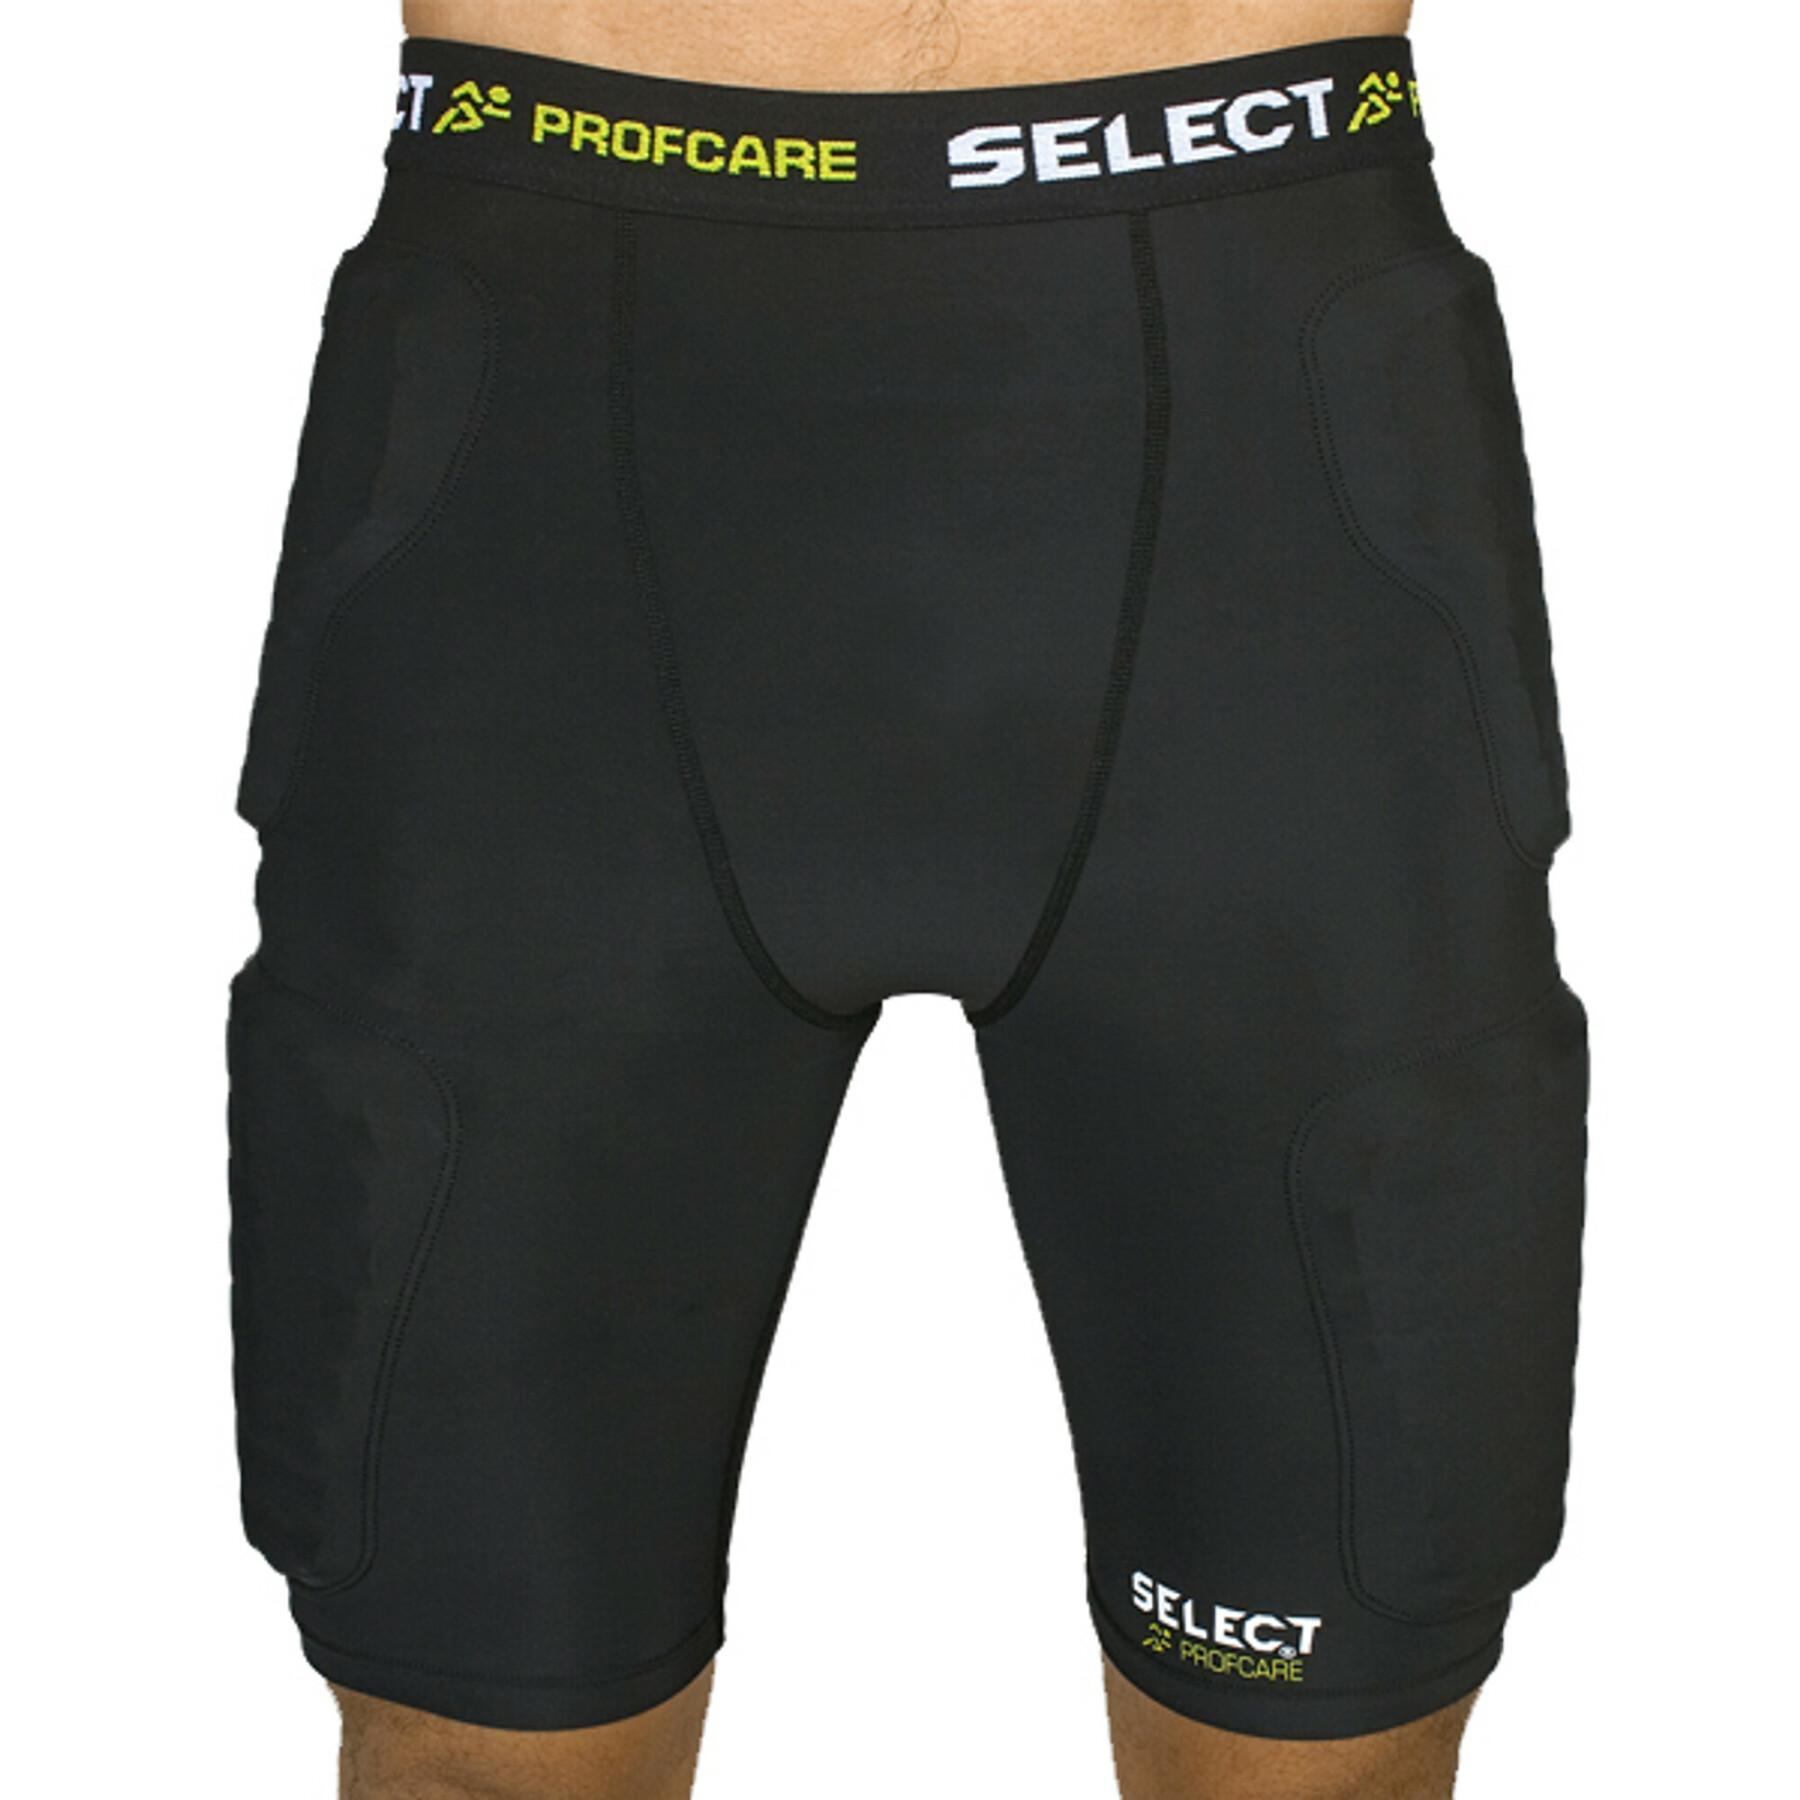 PRN Padded Compression Shorts |  | Official Store